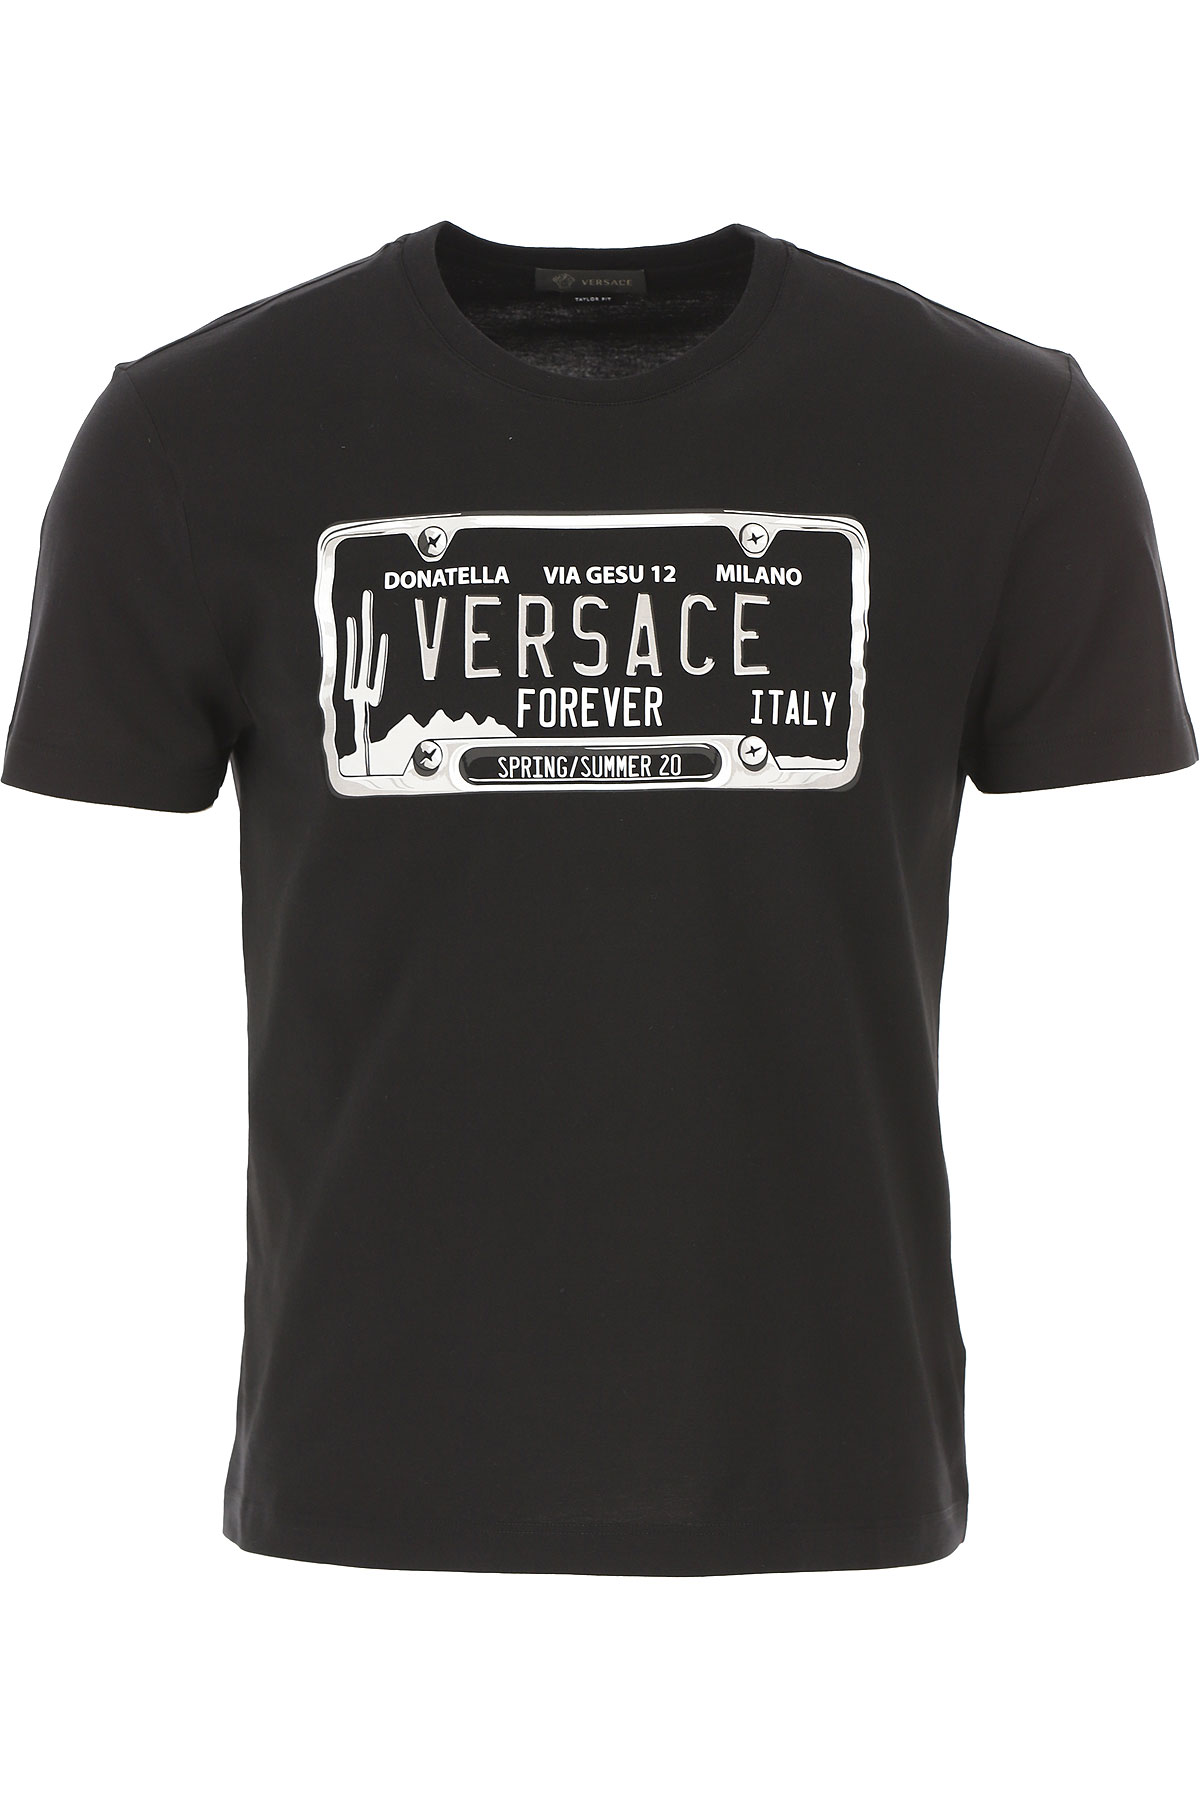 Mens Clothing Versace, Style code: a86002-a228806-a1690